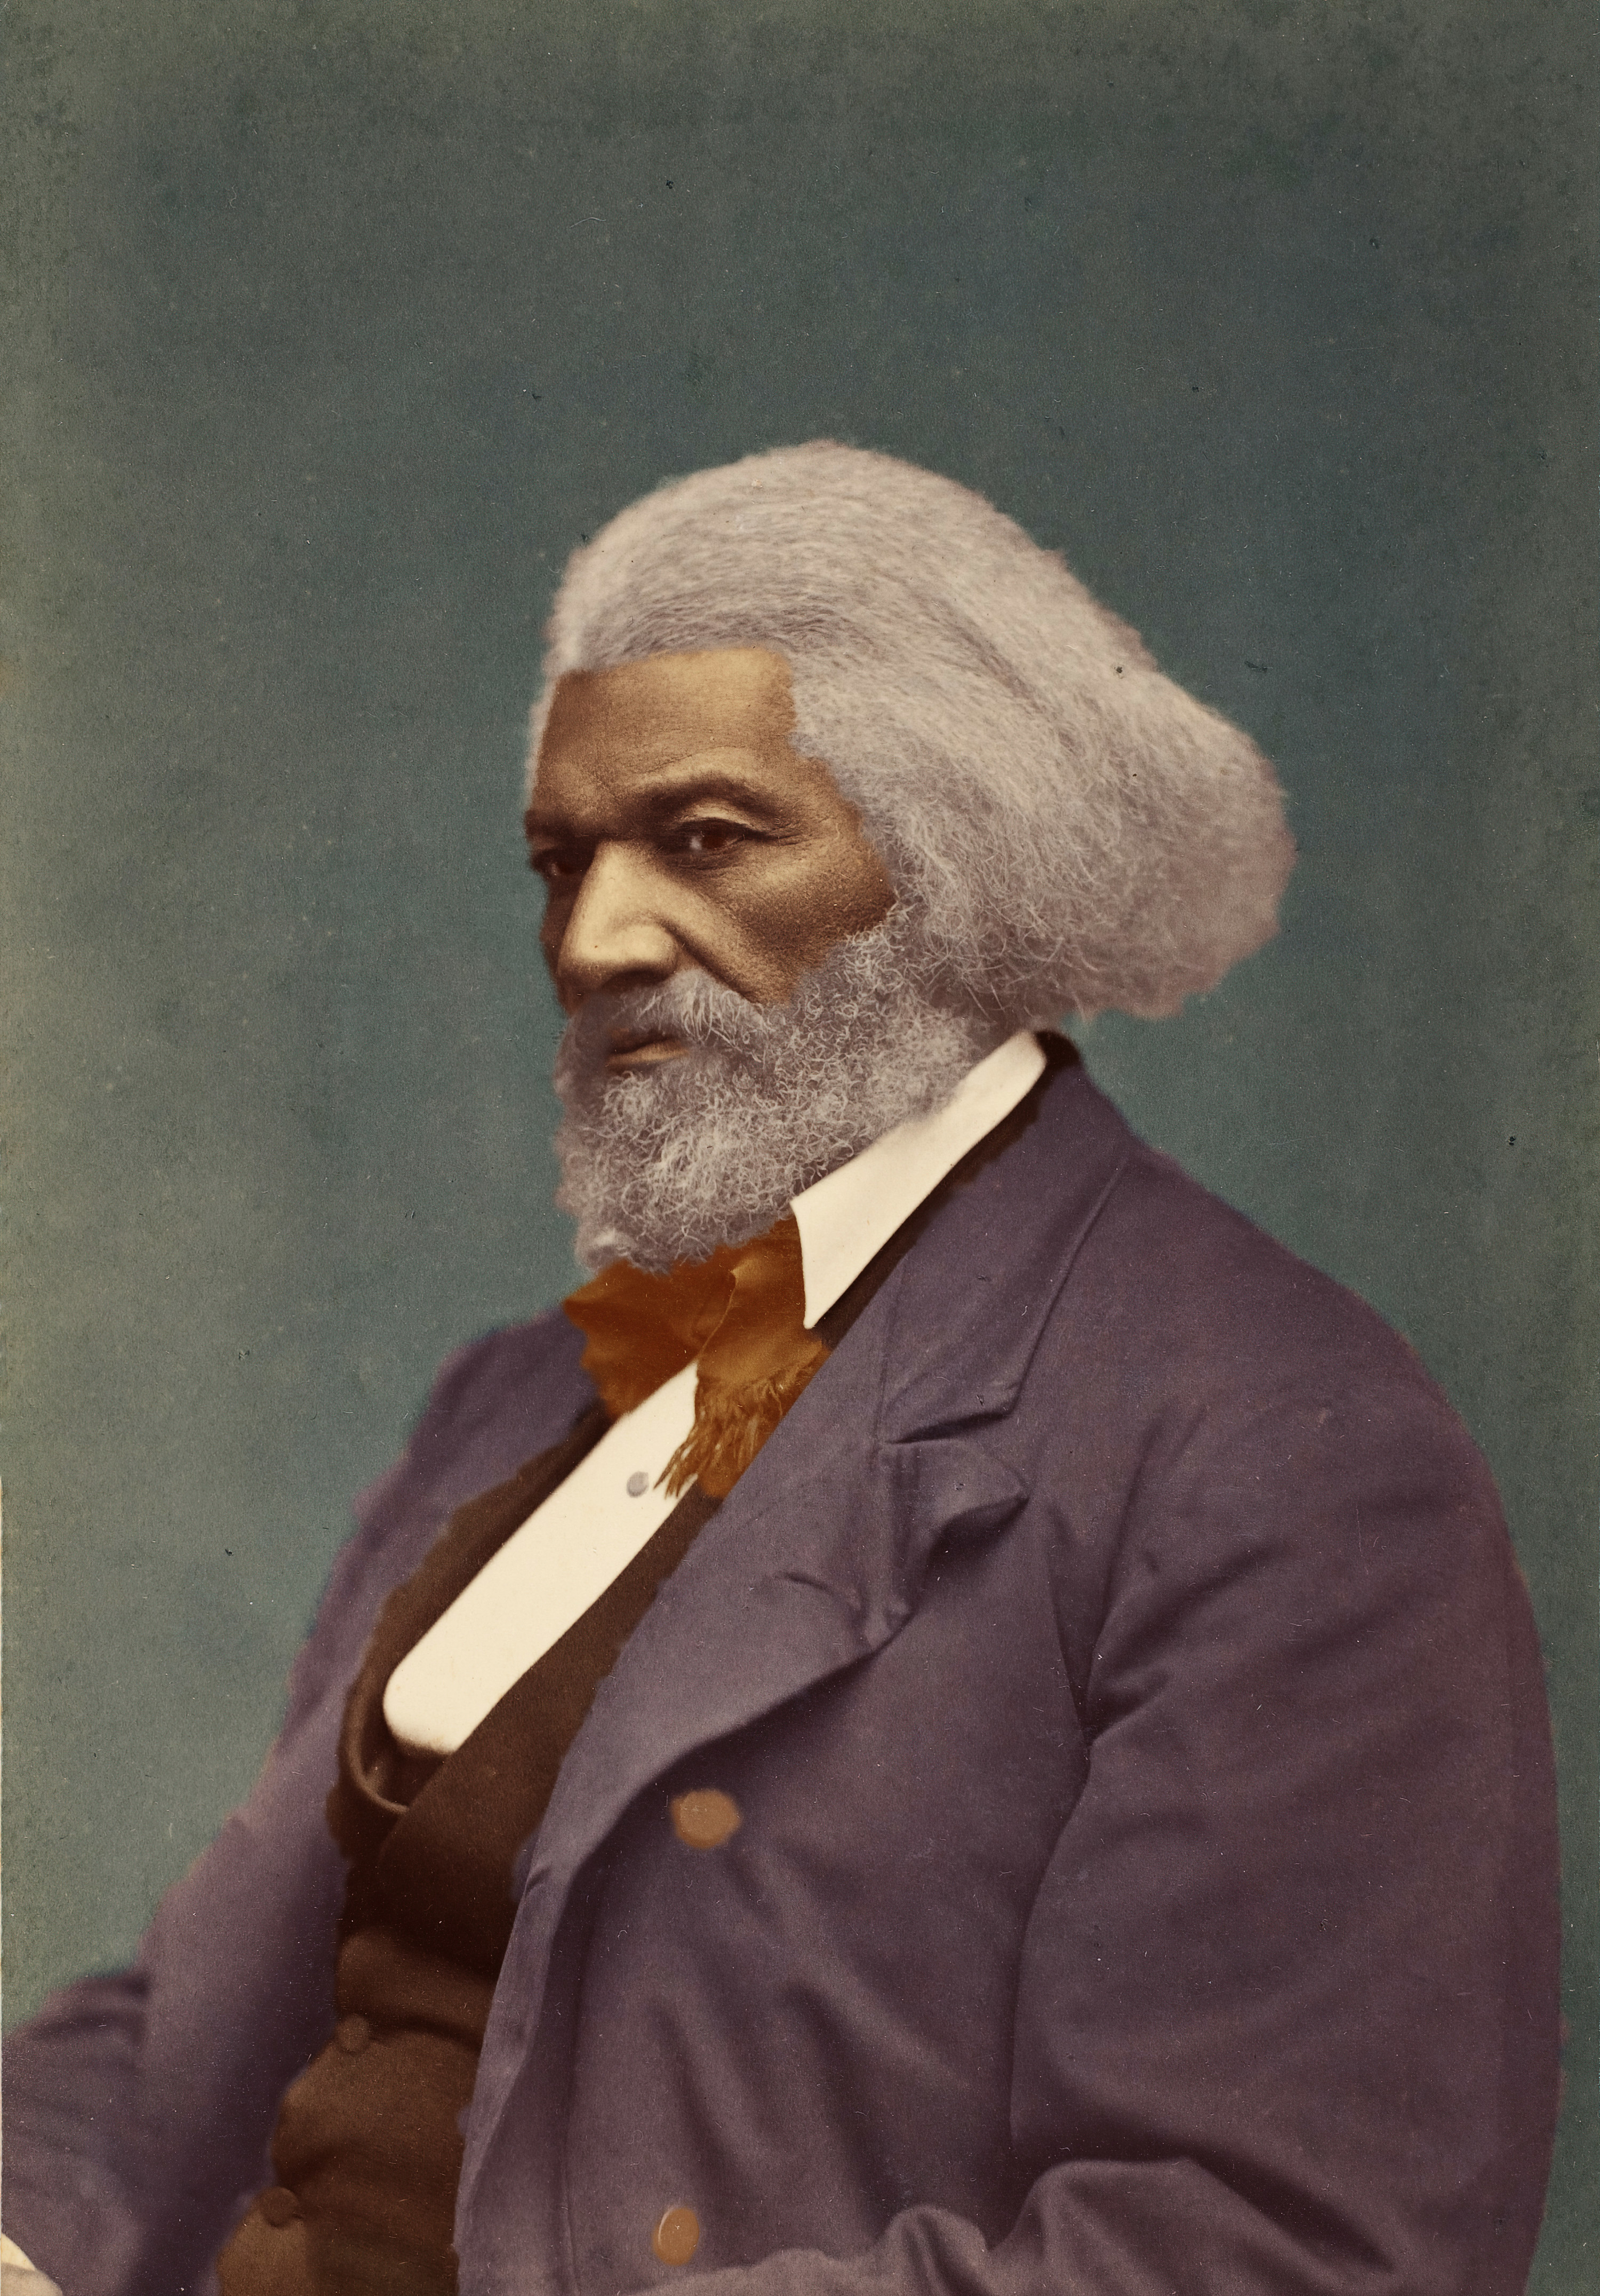 A photo of Frederick Douglass from the year 1880